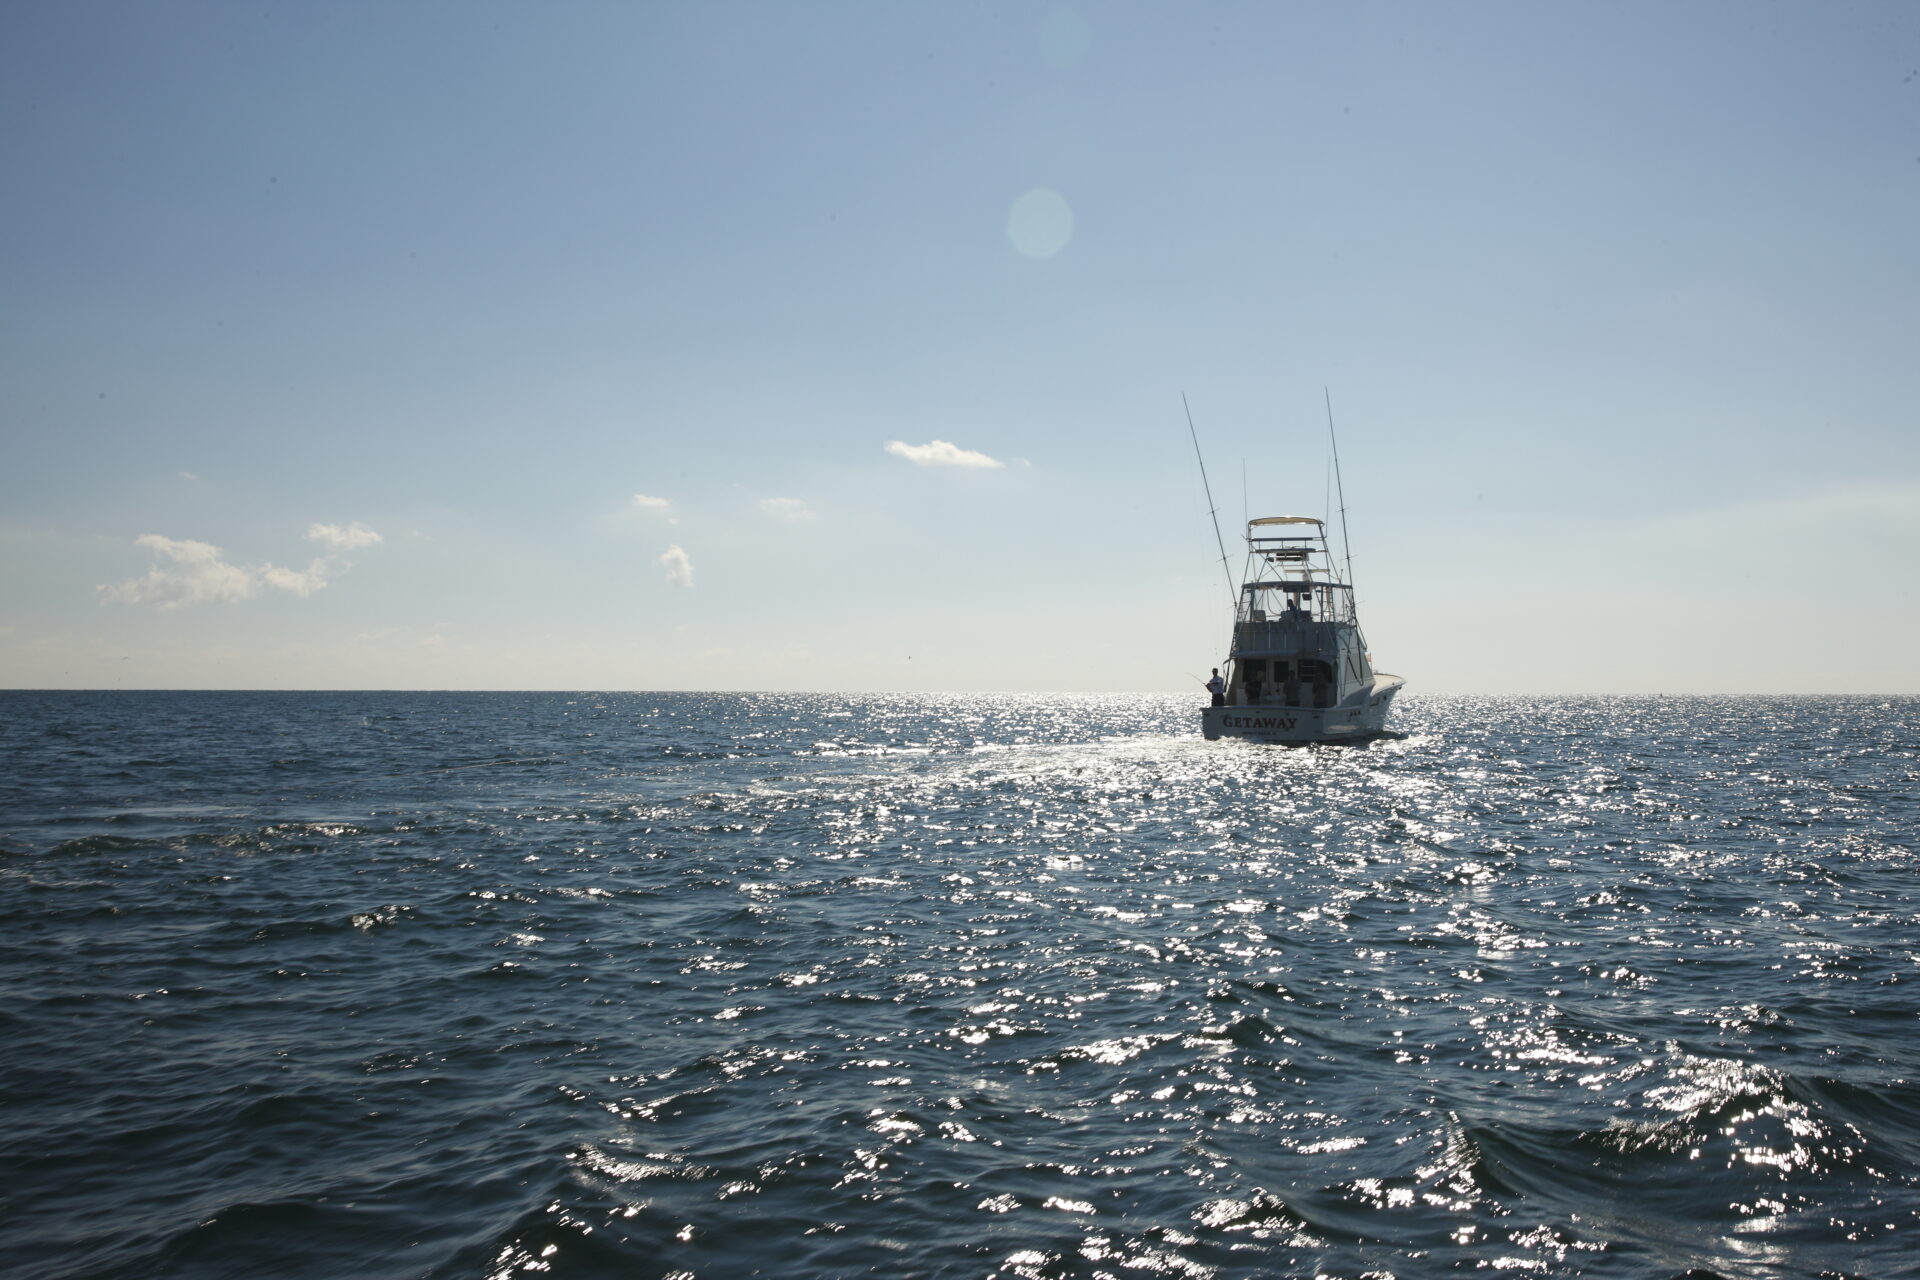 Fishing Charter from Gulf Shores Orange Beach Alabama, fishing boat off in the distance in the water with fisher rods hanging off--photo courtesy of Alabama Beaches Tourism--best gulf shores activities for families